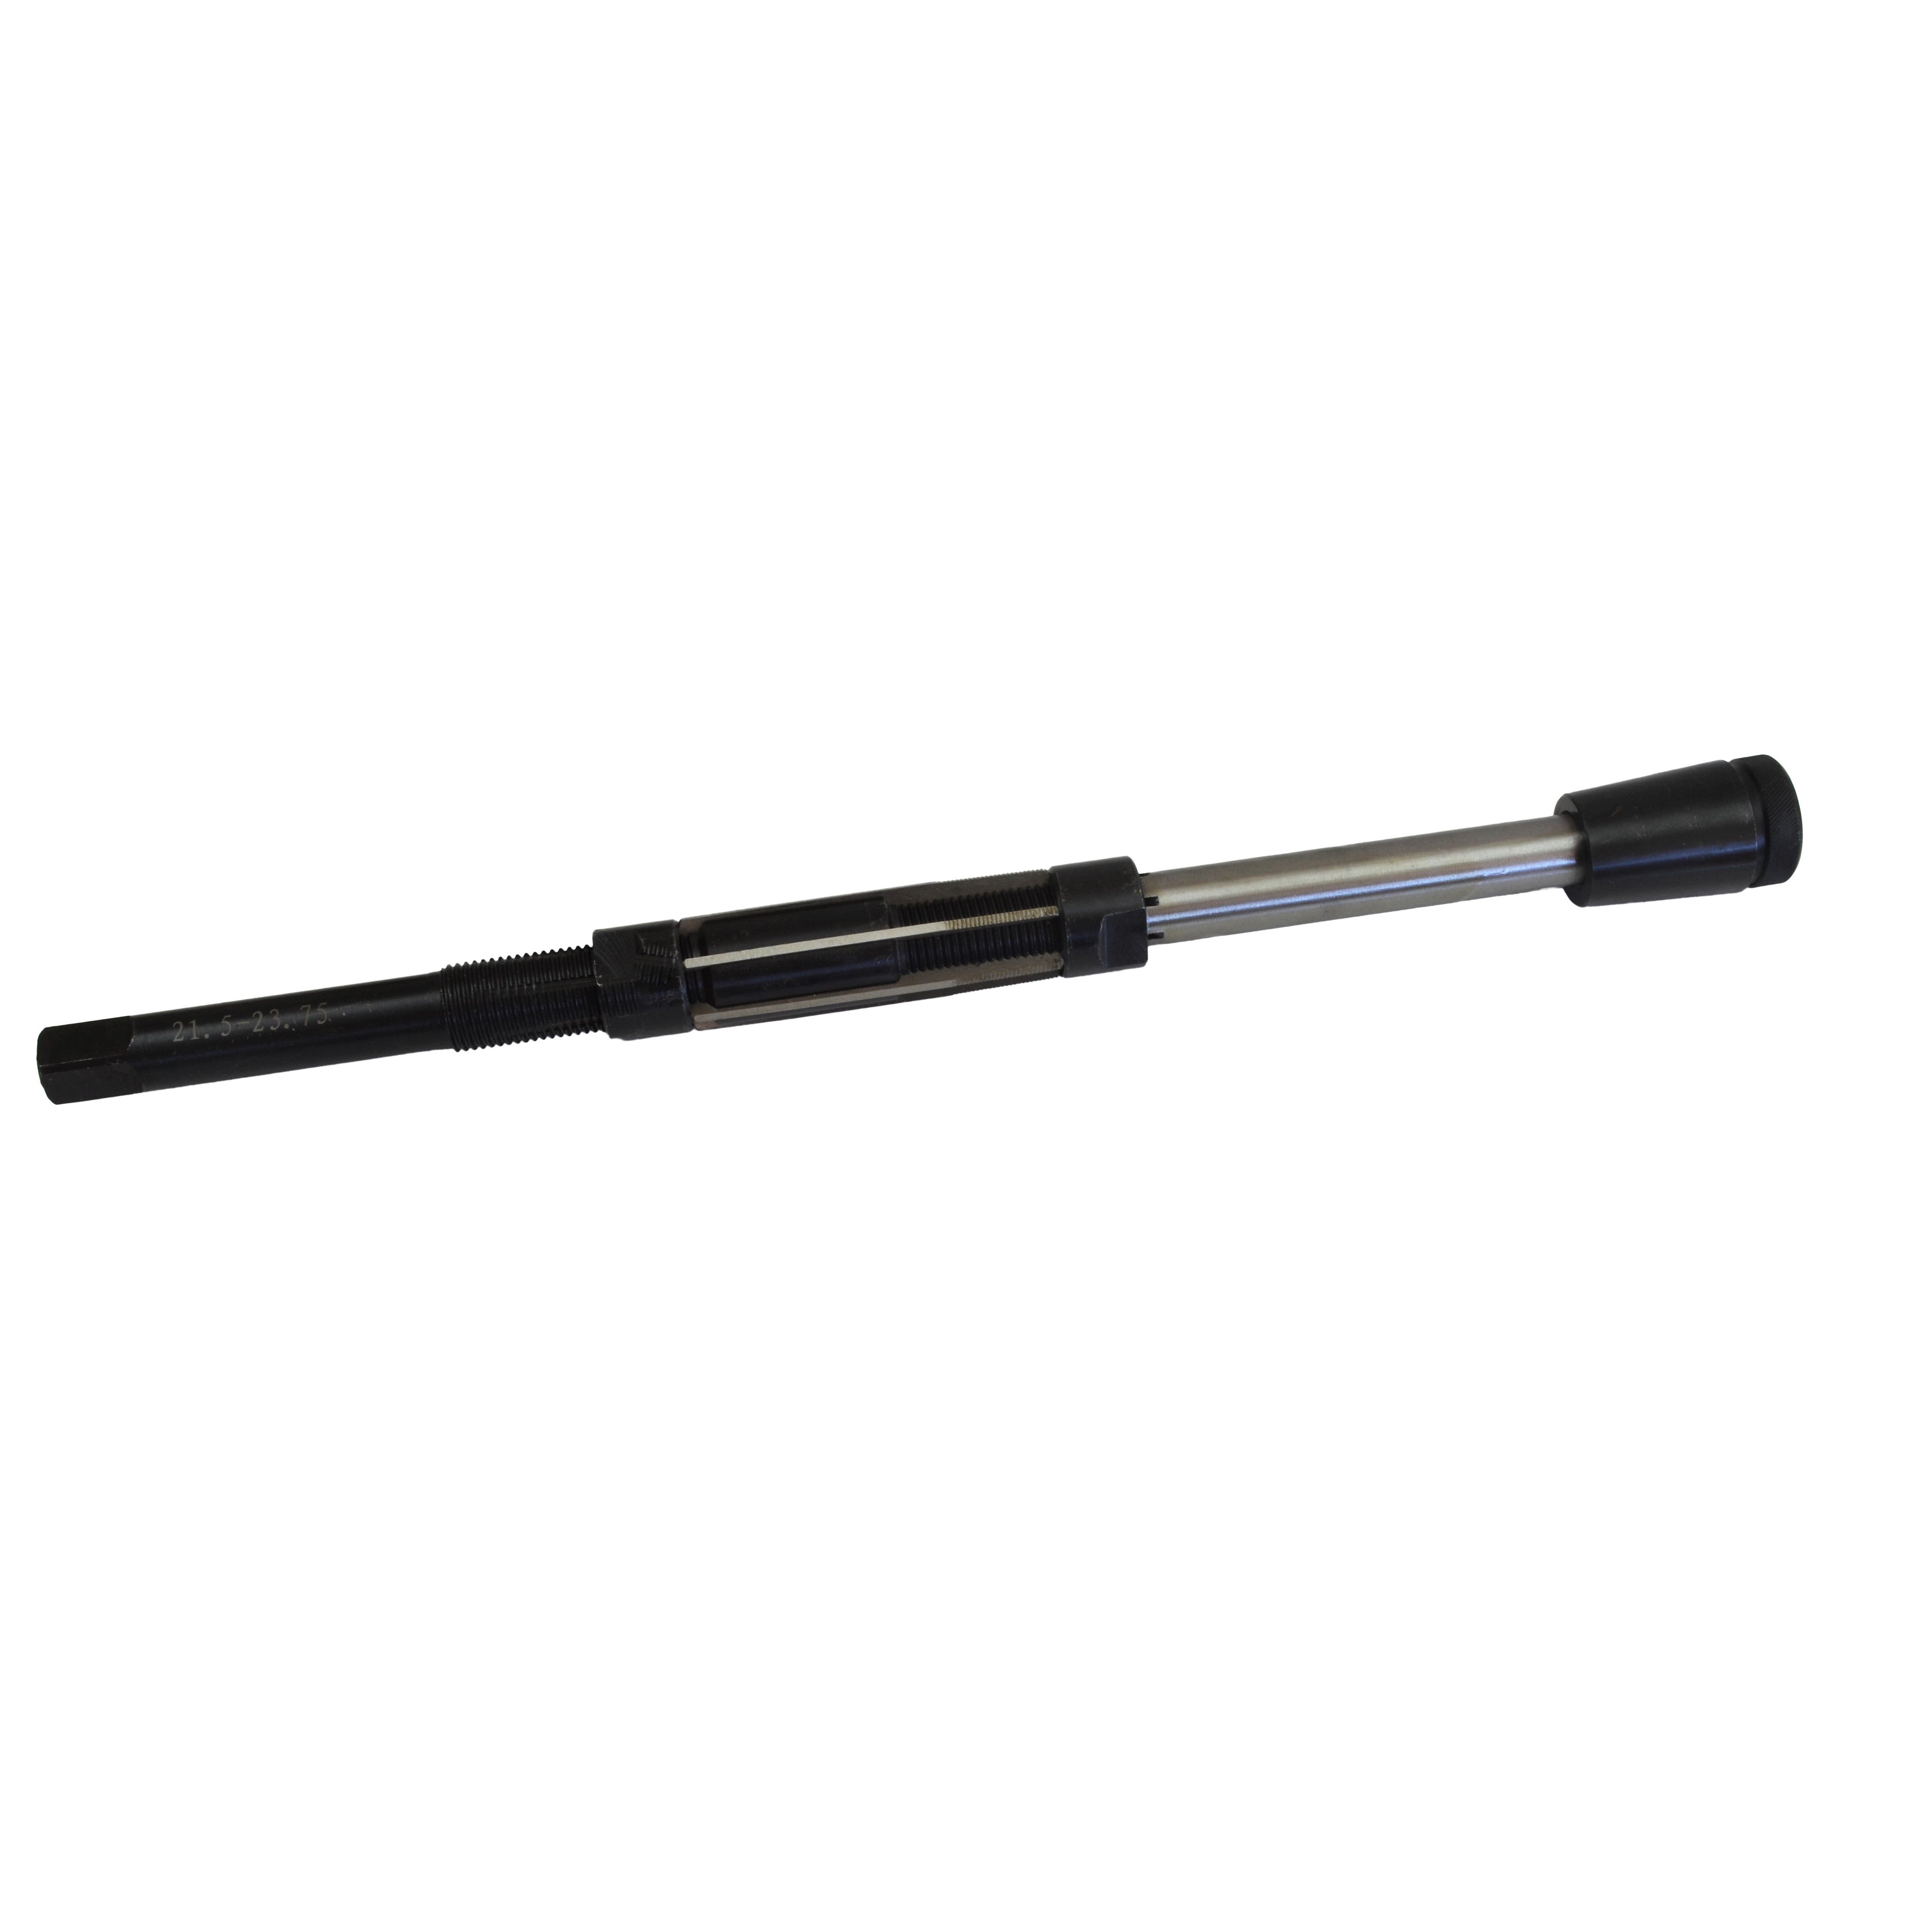 21.5 - 23.75 mmmm Adjustable Hand Reamer with Guide